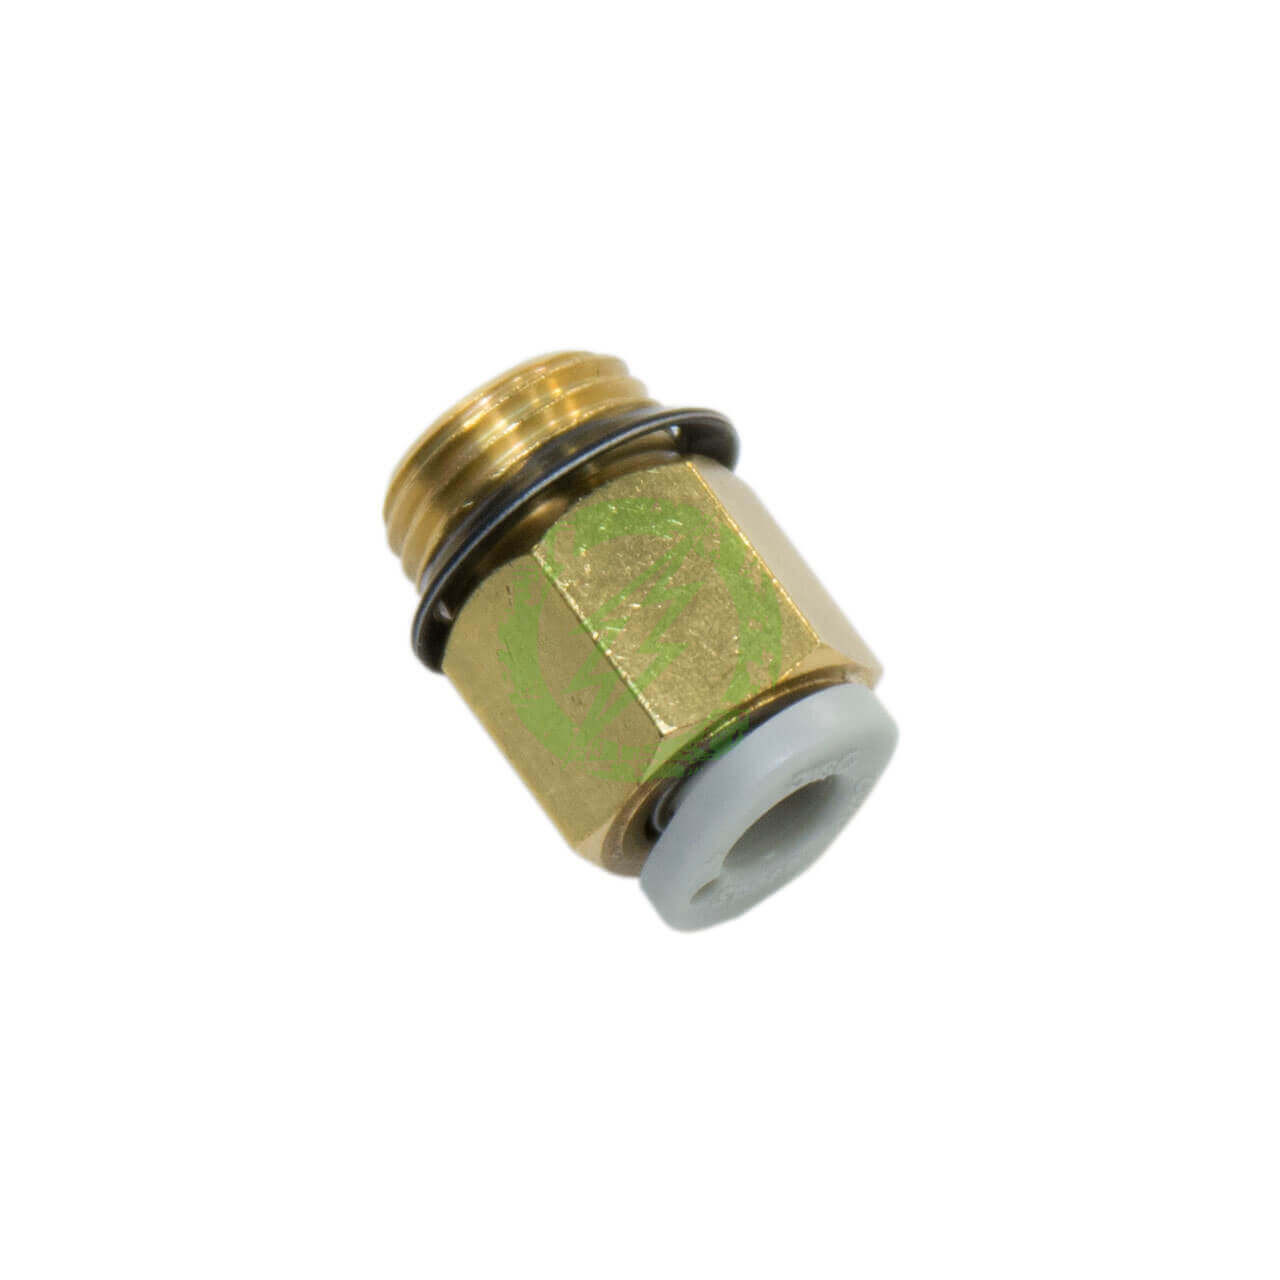 Amped Airsoft HIS SMC 4mm Tube QD 1/8" NPT Male Fitting 